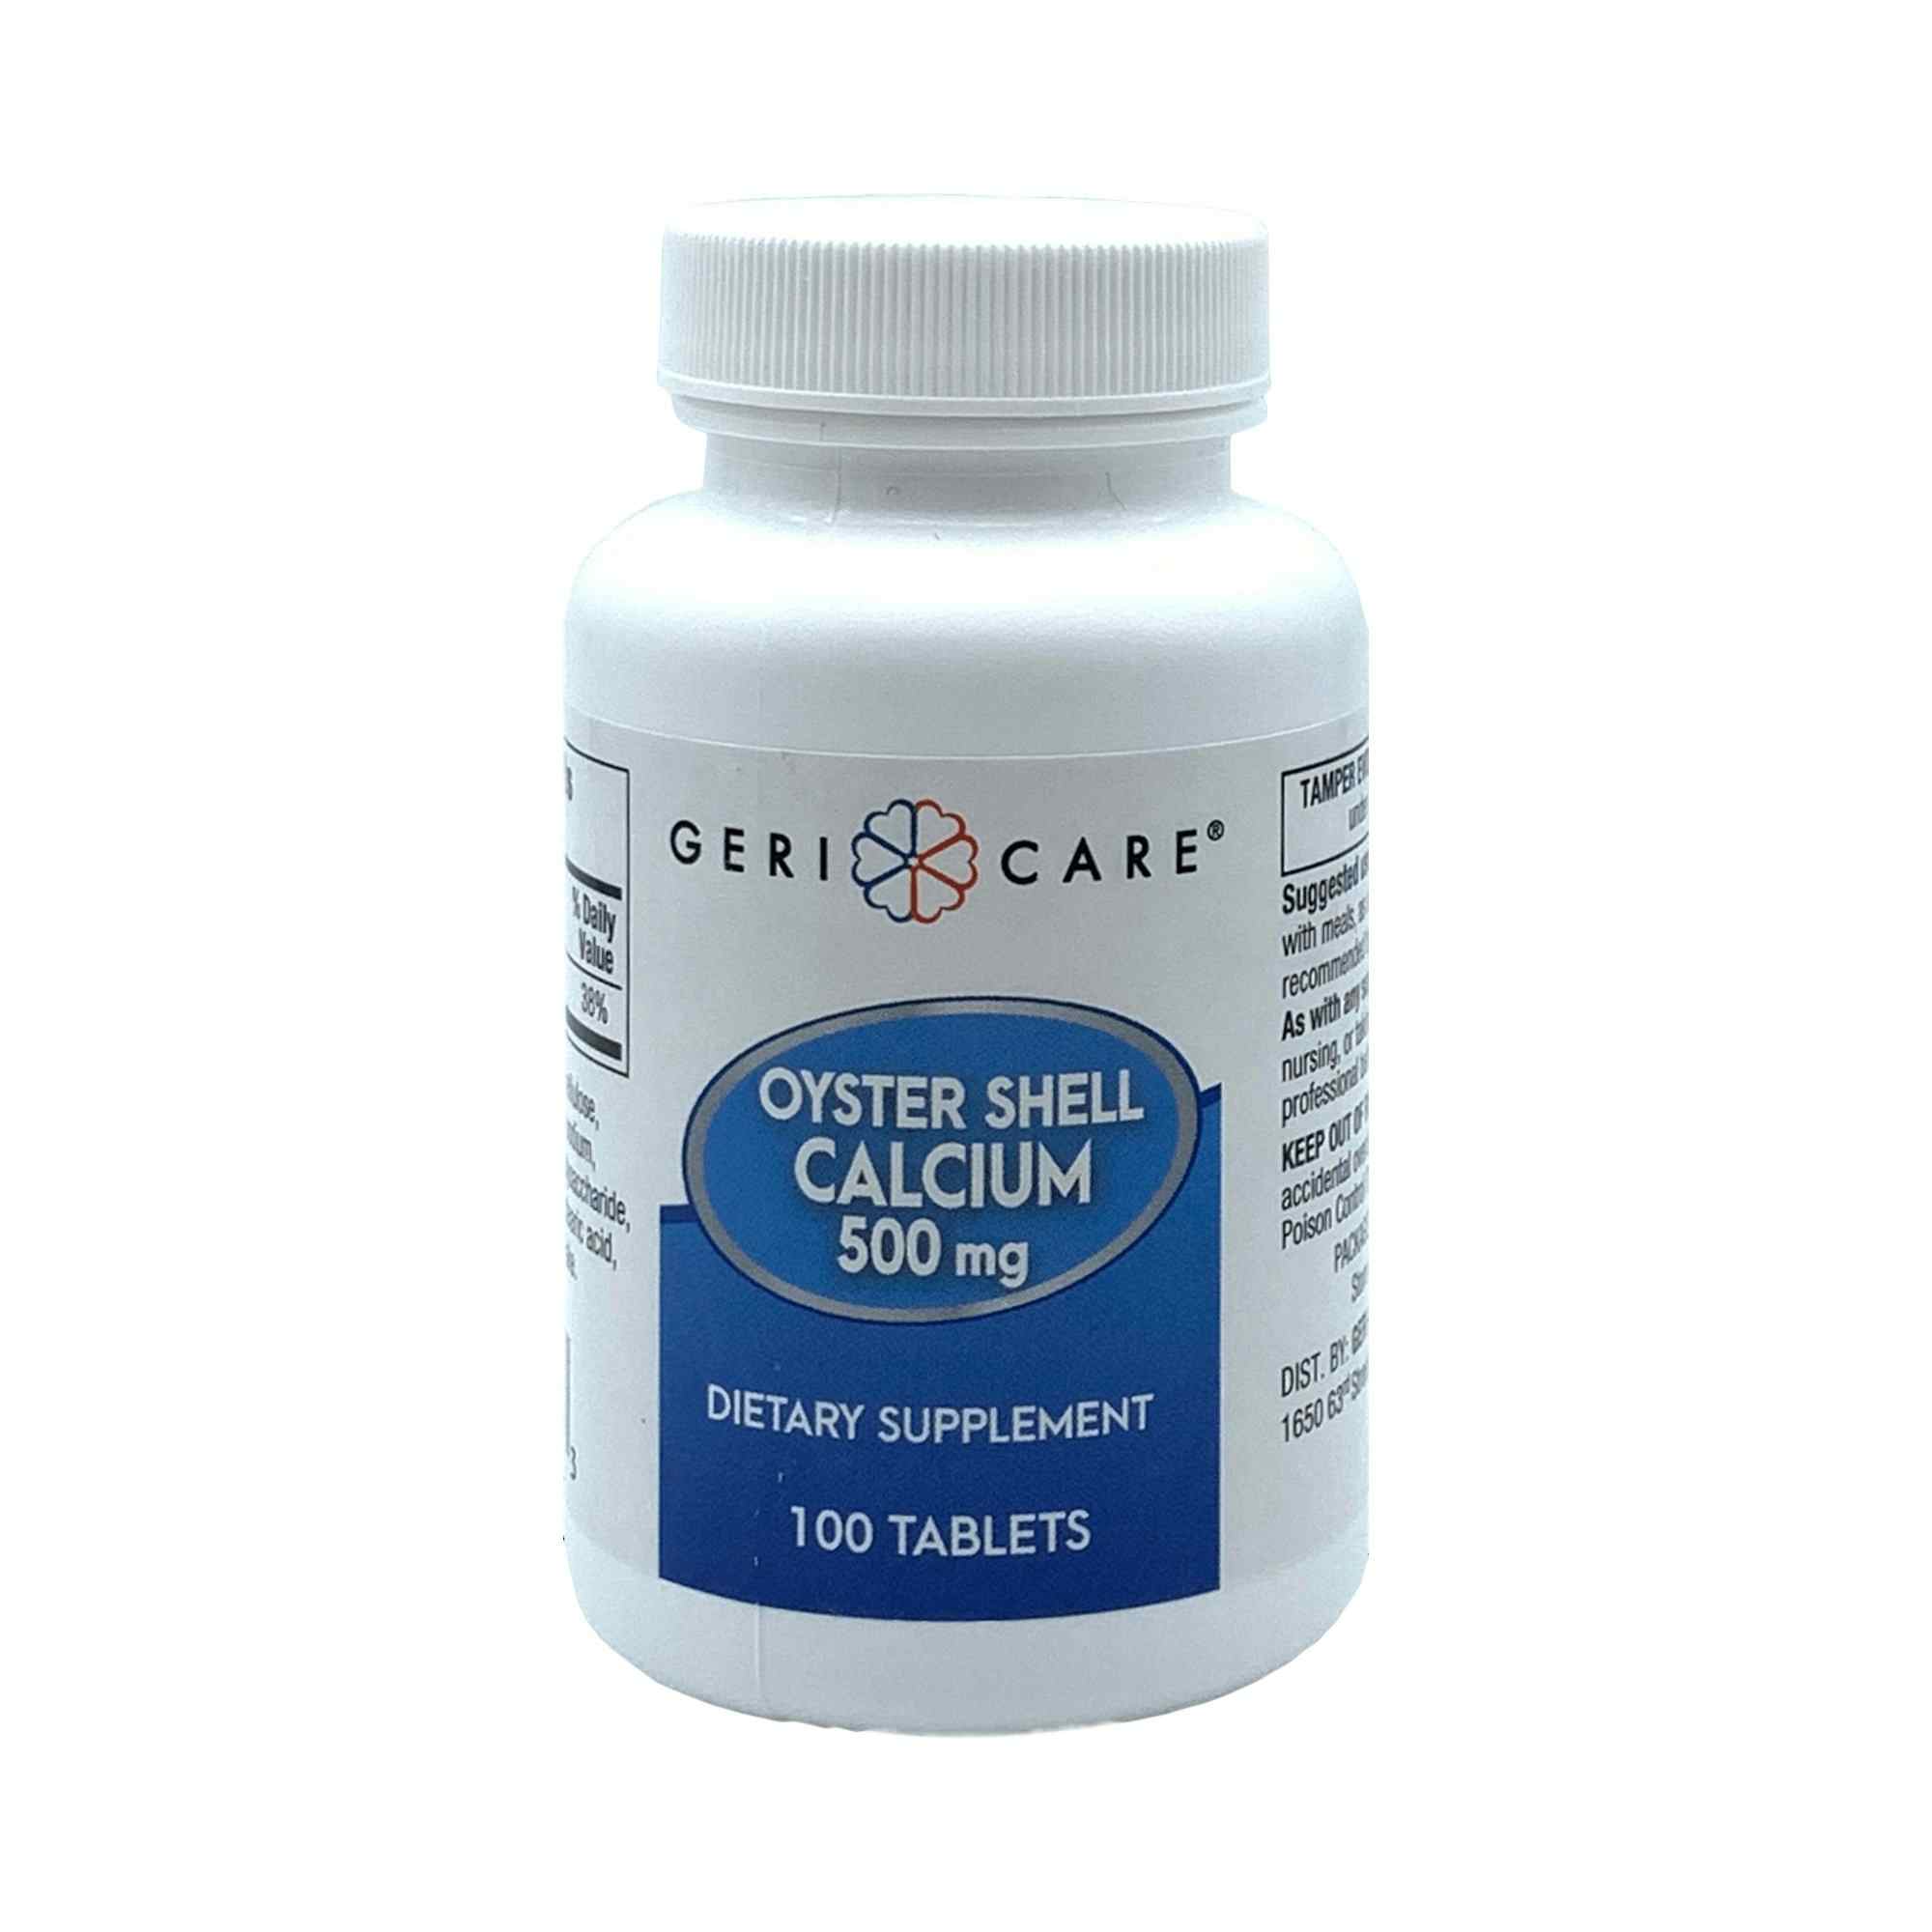 Geri-Care Oyster Shell Calcium Dietary Supplement, 500 mg, 100 Tablets